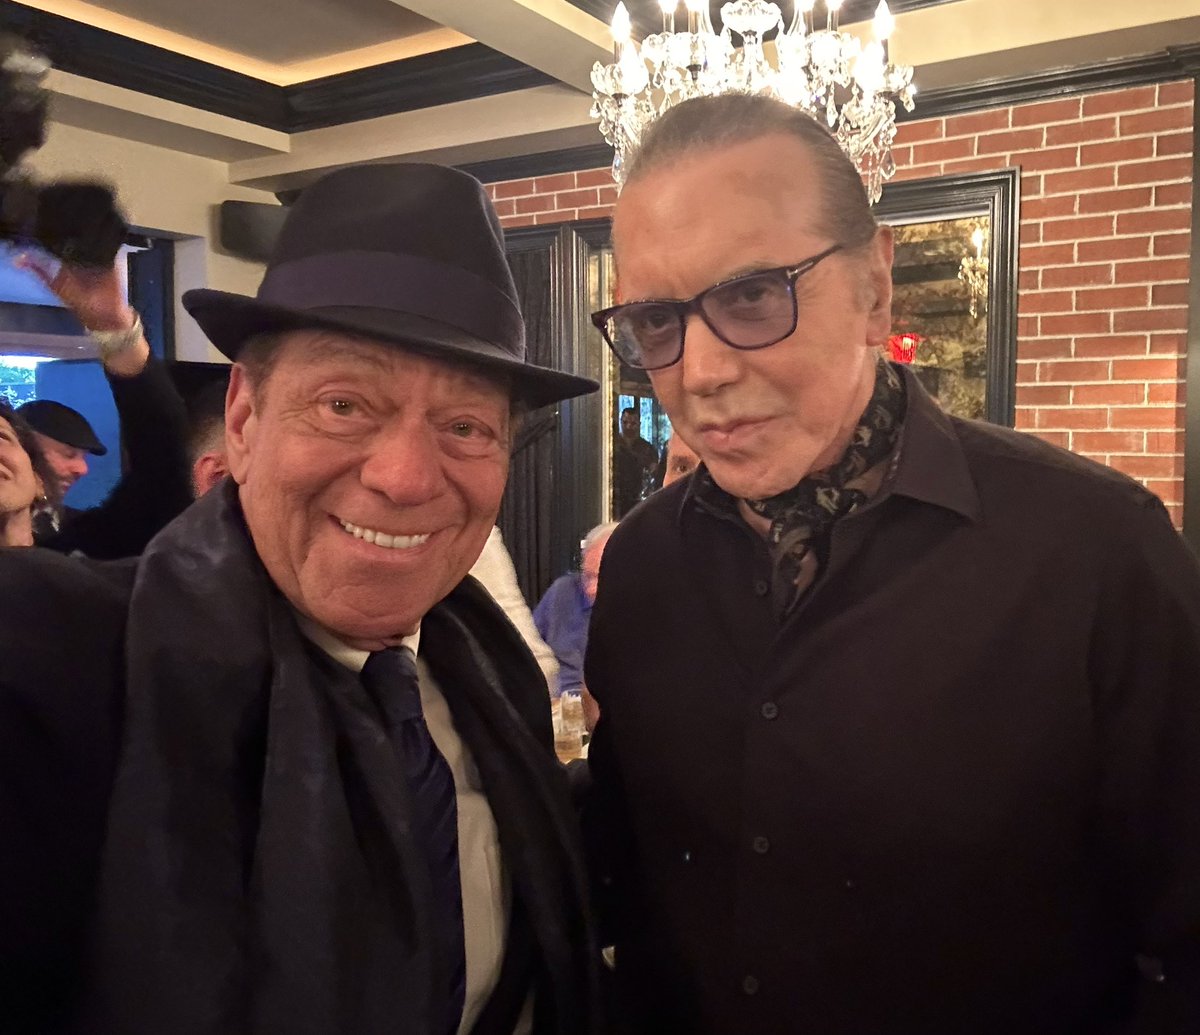 Great to catch up with #TheLegend and dear friend @chazzpalminteri for Chazz and Gianna’s #ChildReachFoundation and @bluelivesmtr #StatenIsland